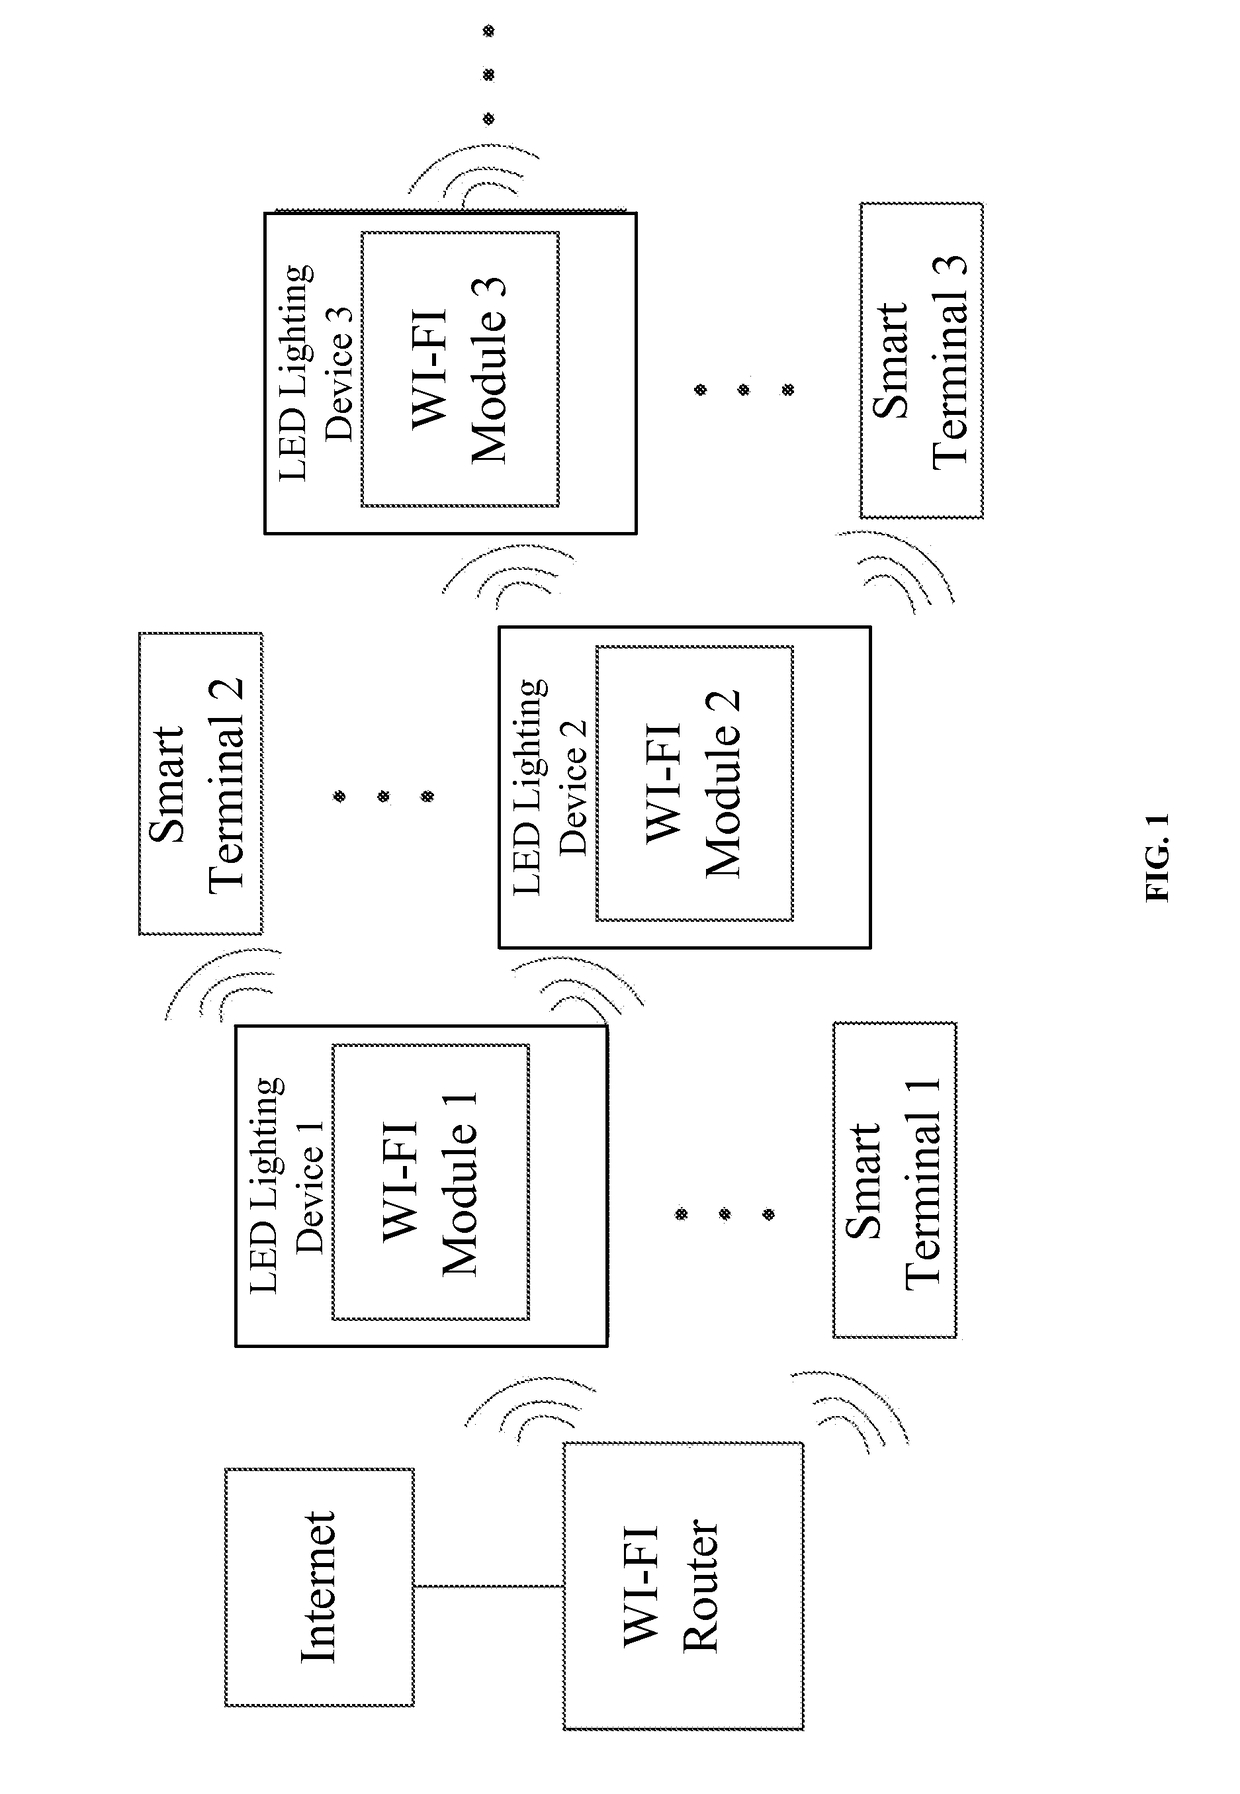 Wireless network system and smart device management method using LED lighting devices